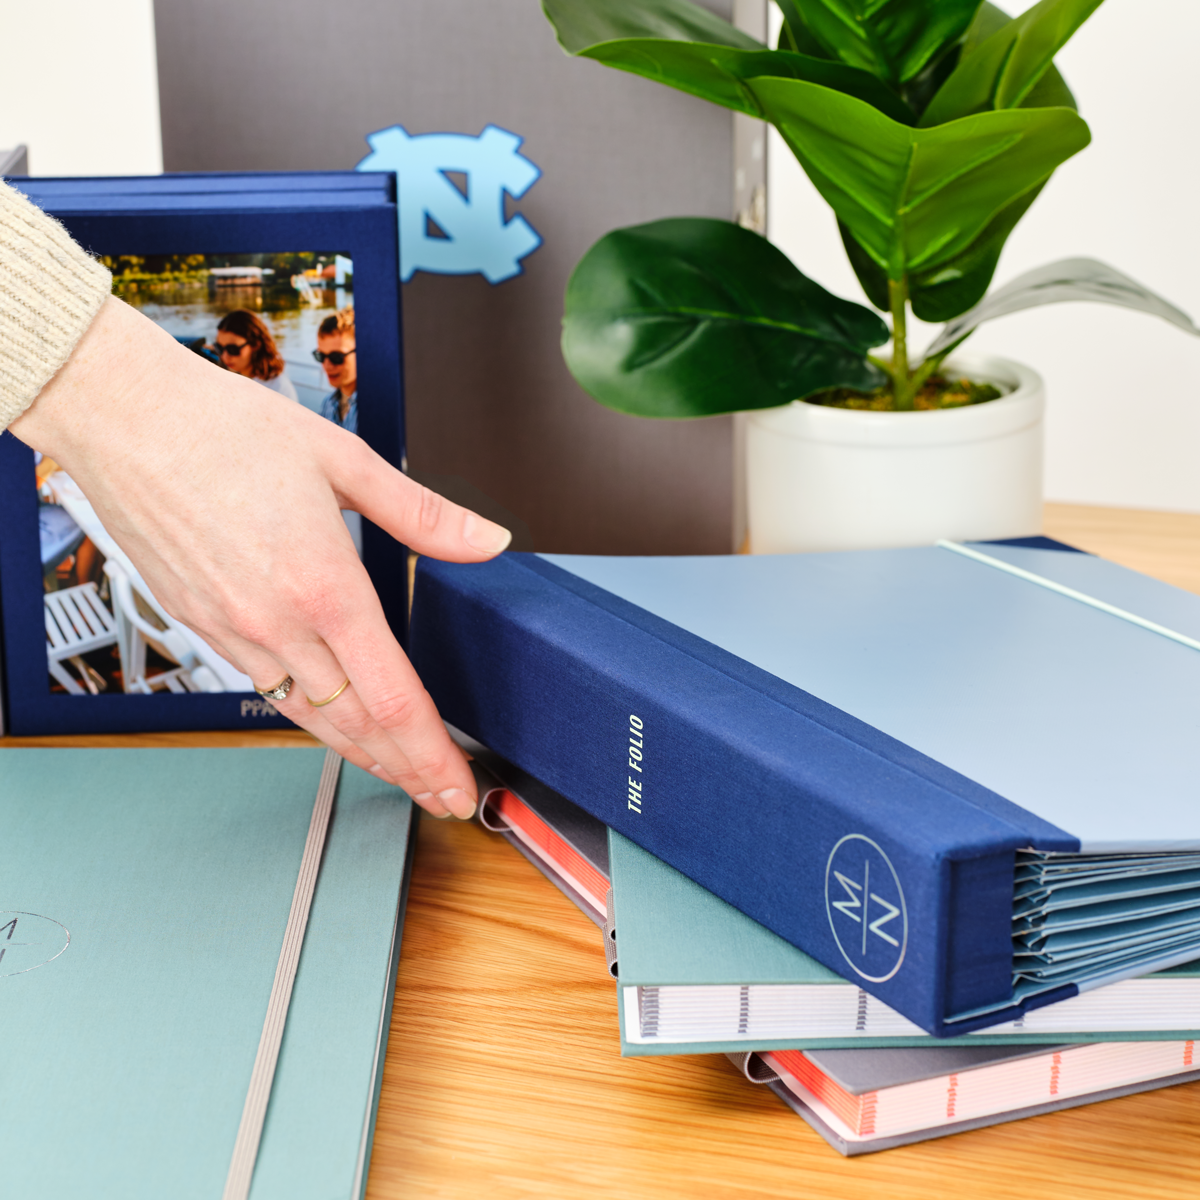 A woman’s hand putting a blue document organizer folio on a table.